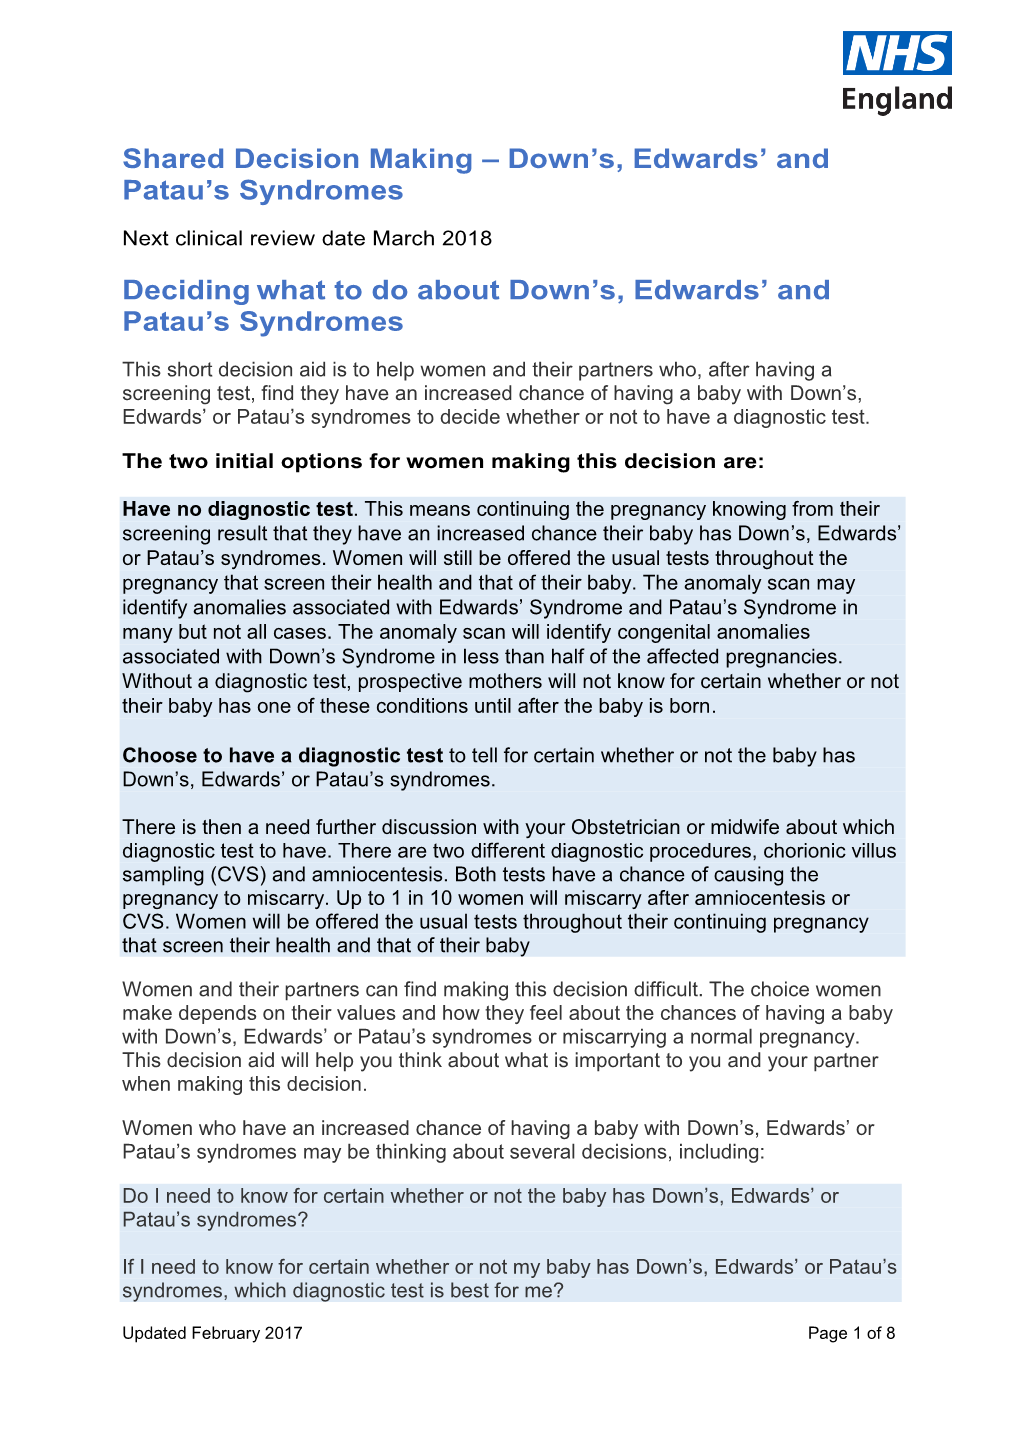 Shared Decision Making – Down's, Edwards' and Patau's Syndromes